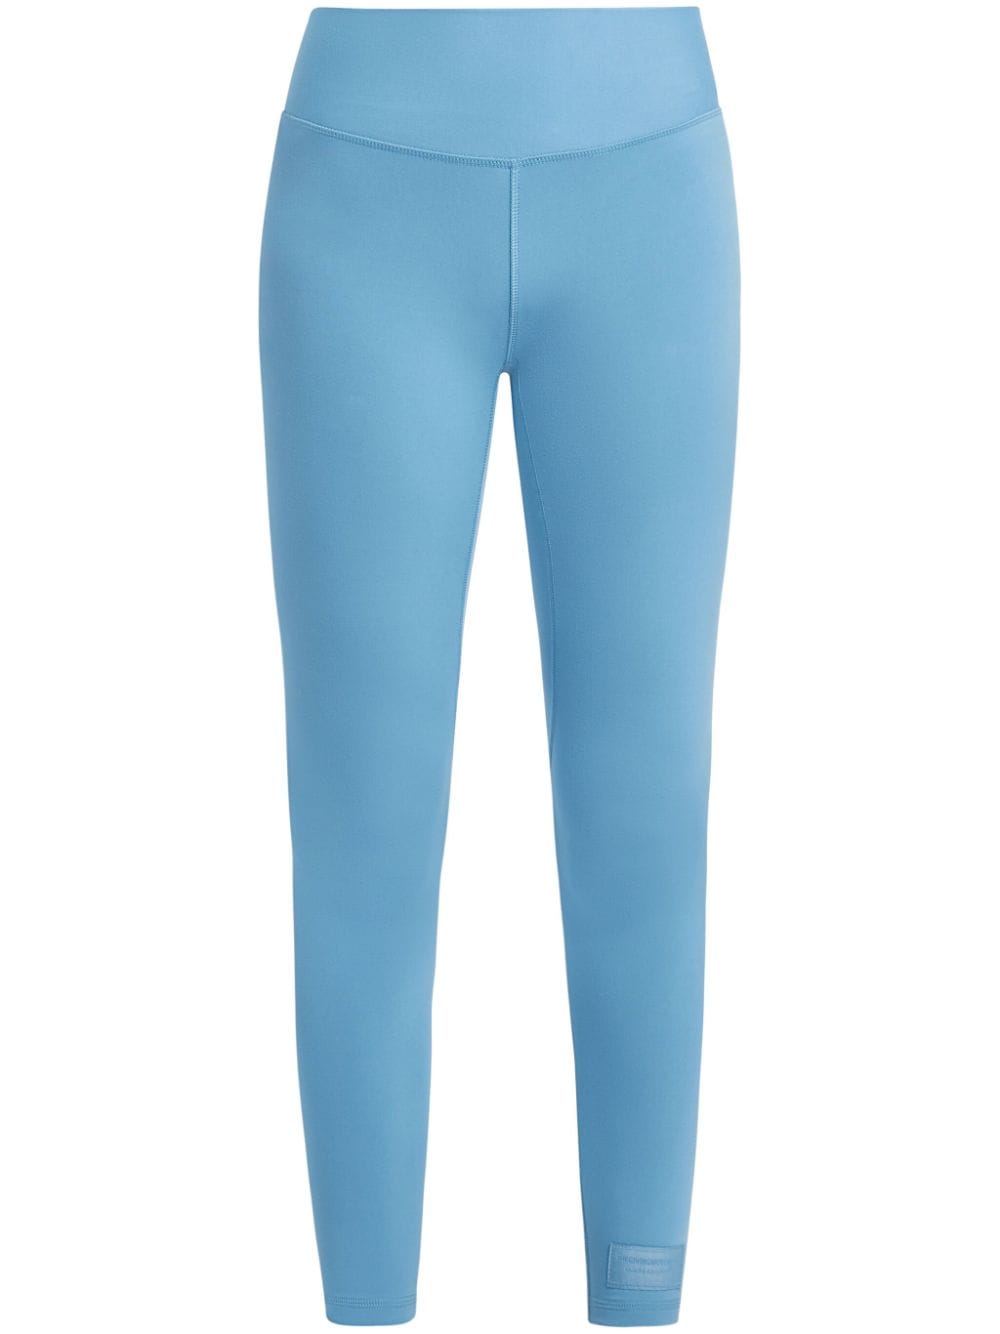 THE GIVING MOVEMENT high-rise leggings - Blue von THE GIVING MOVEMENT